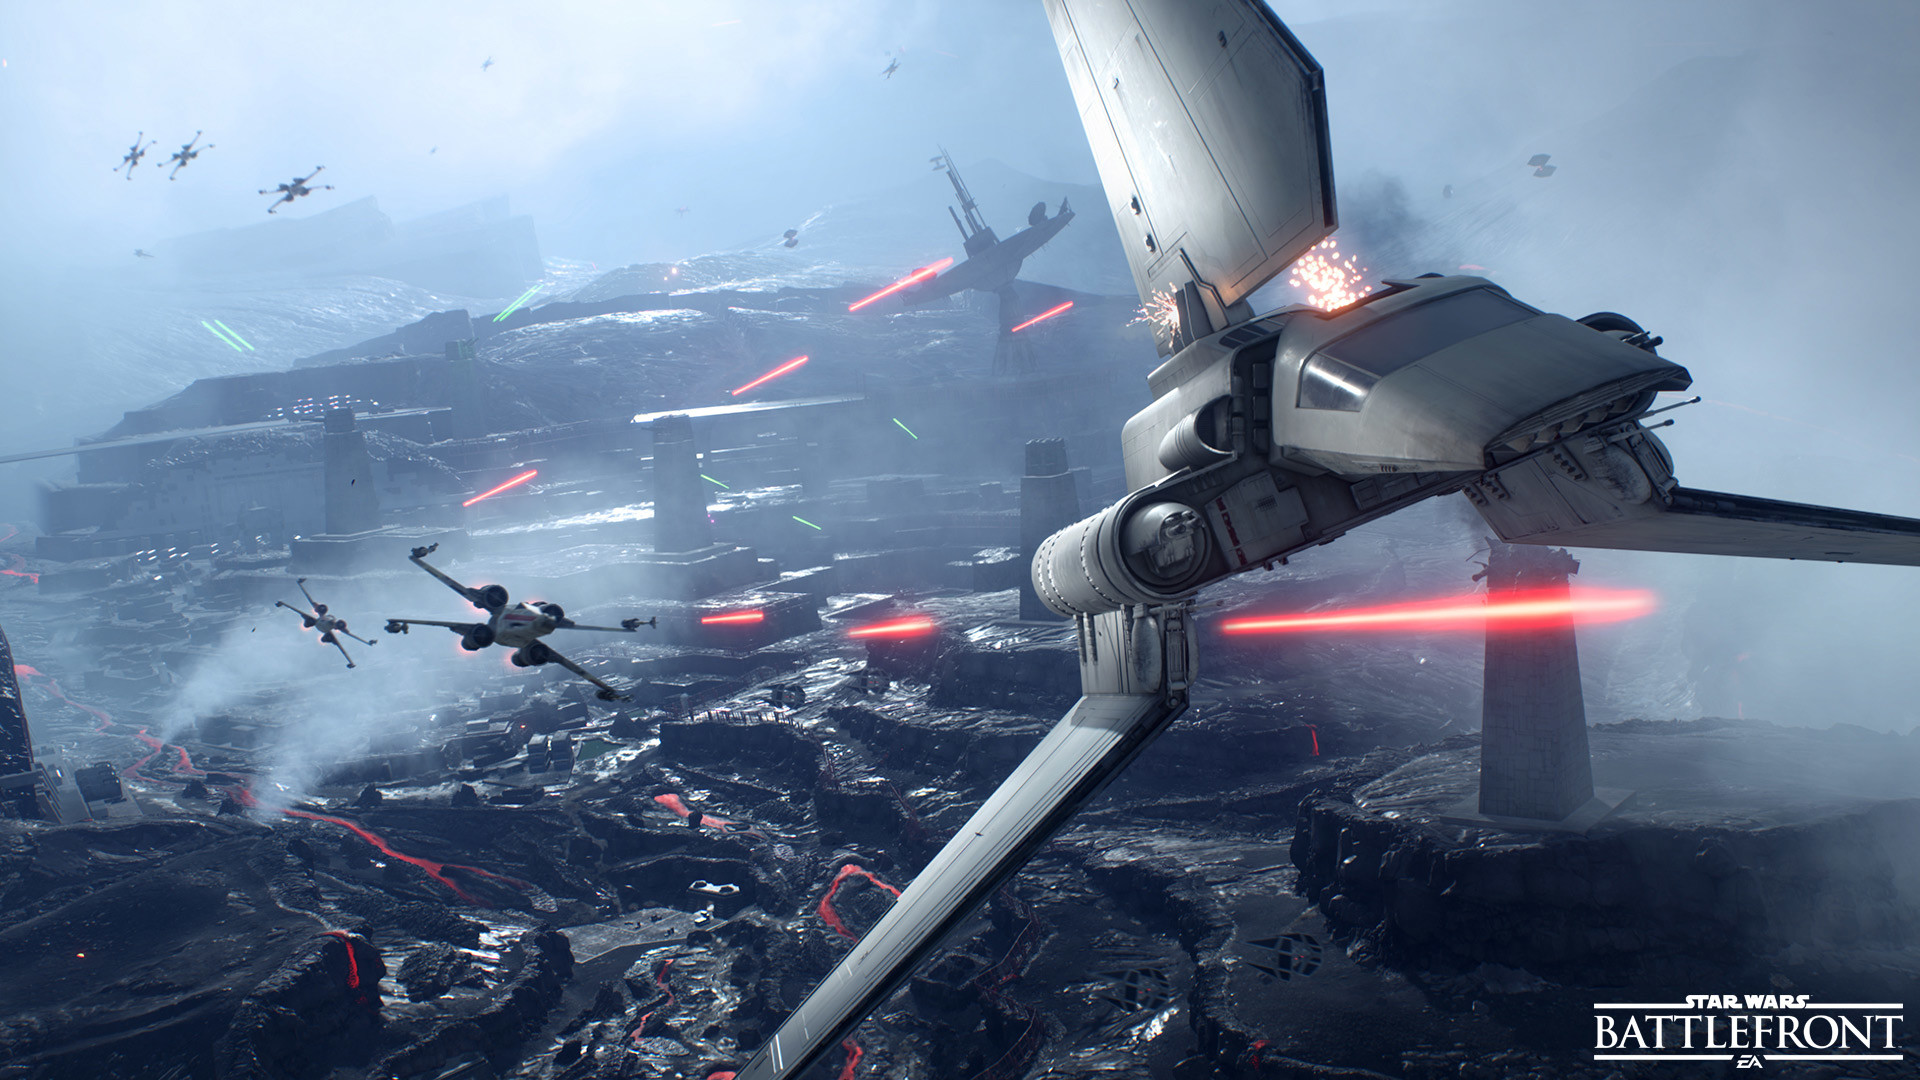 1920x1080 Res:  / Size:468kb. Views: 22953. More Star Wars Battlefront  wallpapers